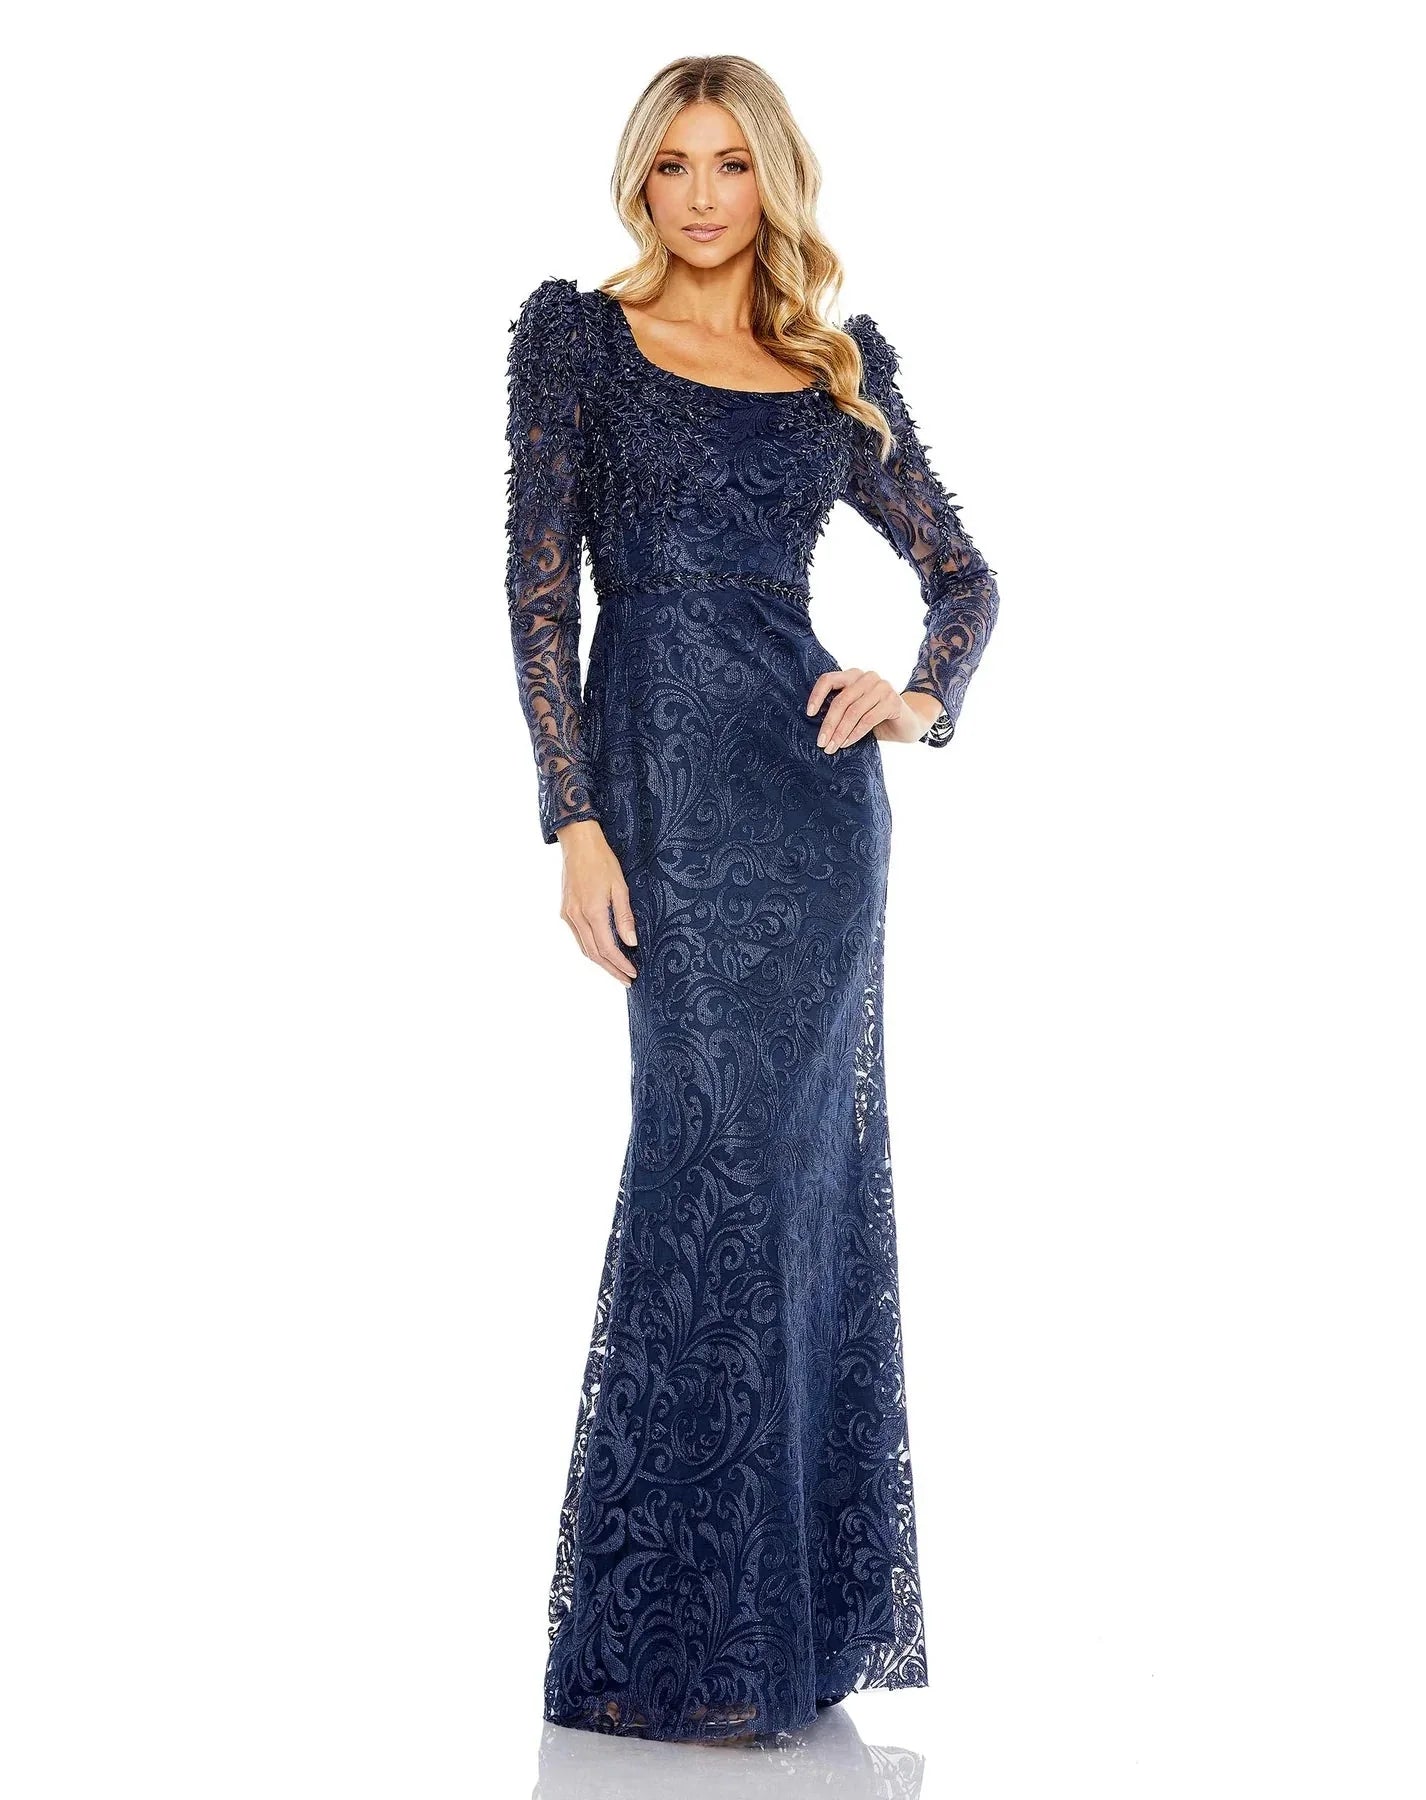 Image of Mac Duggal 11187 - Embroidered Evening Gown